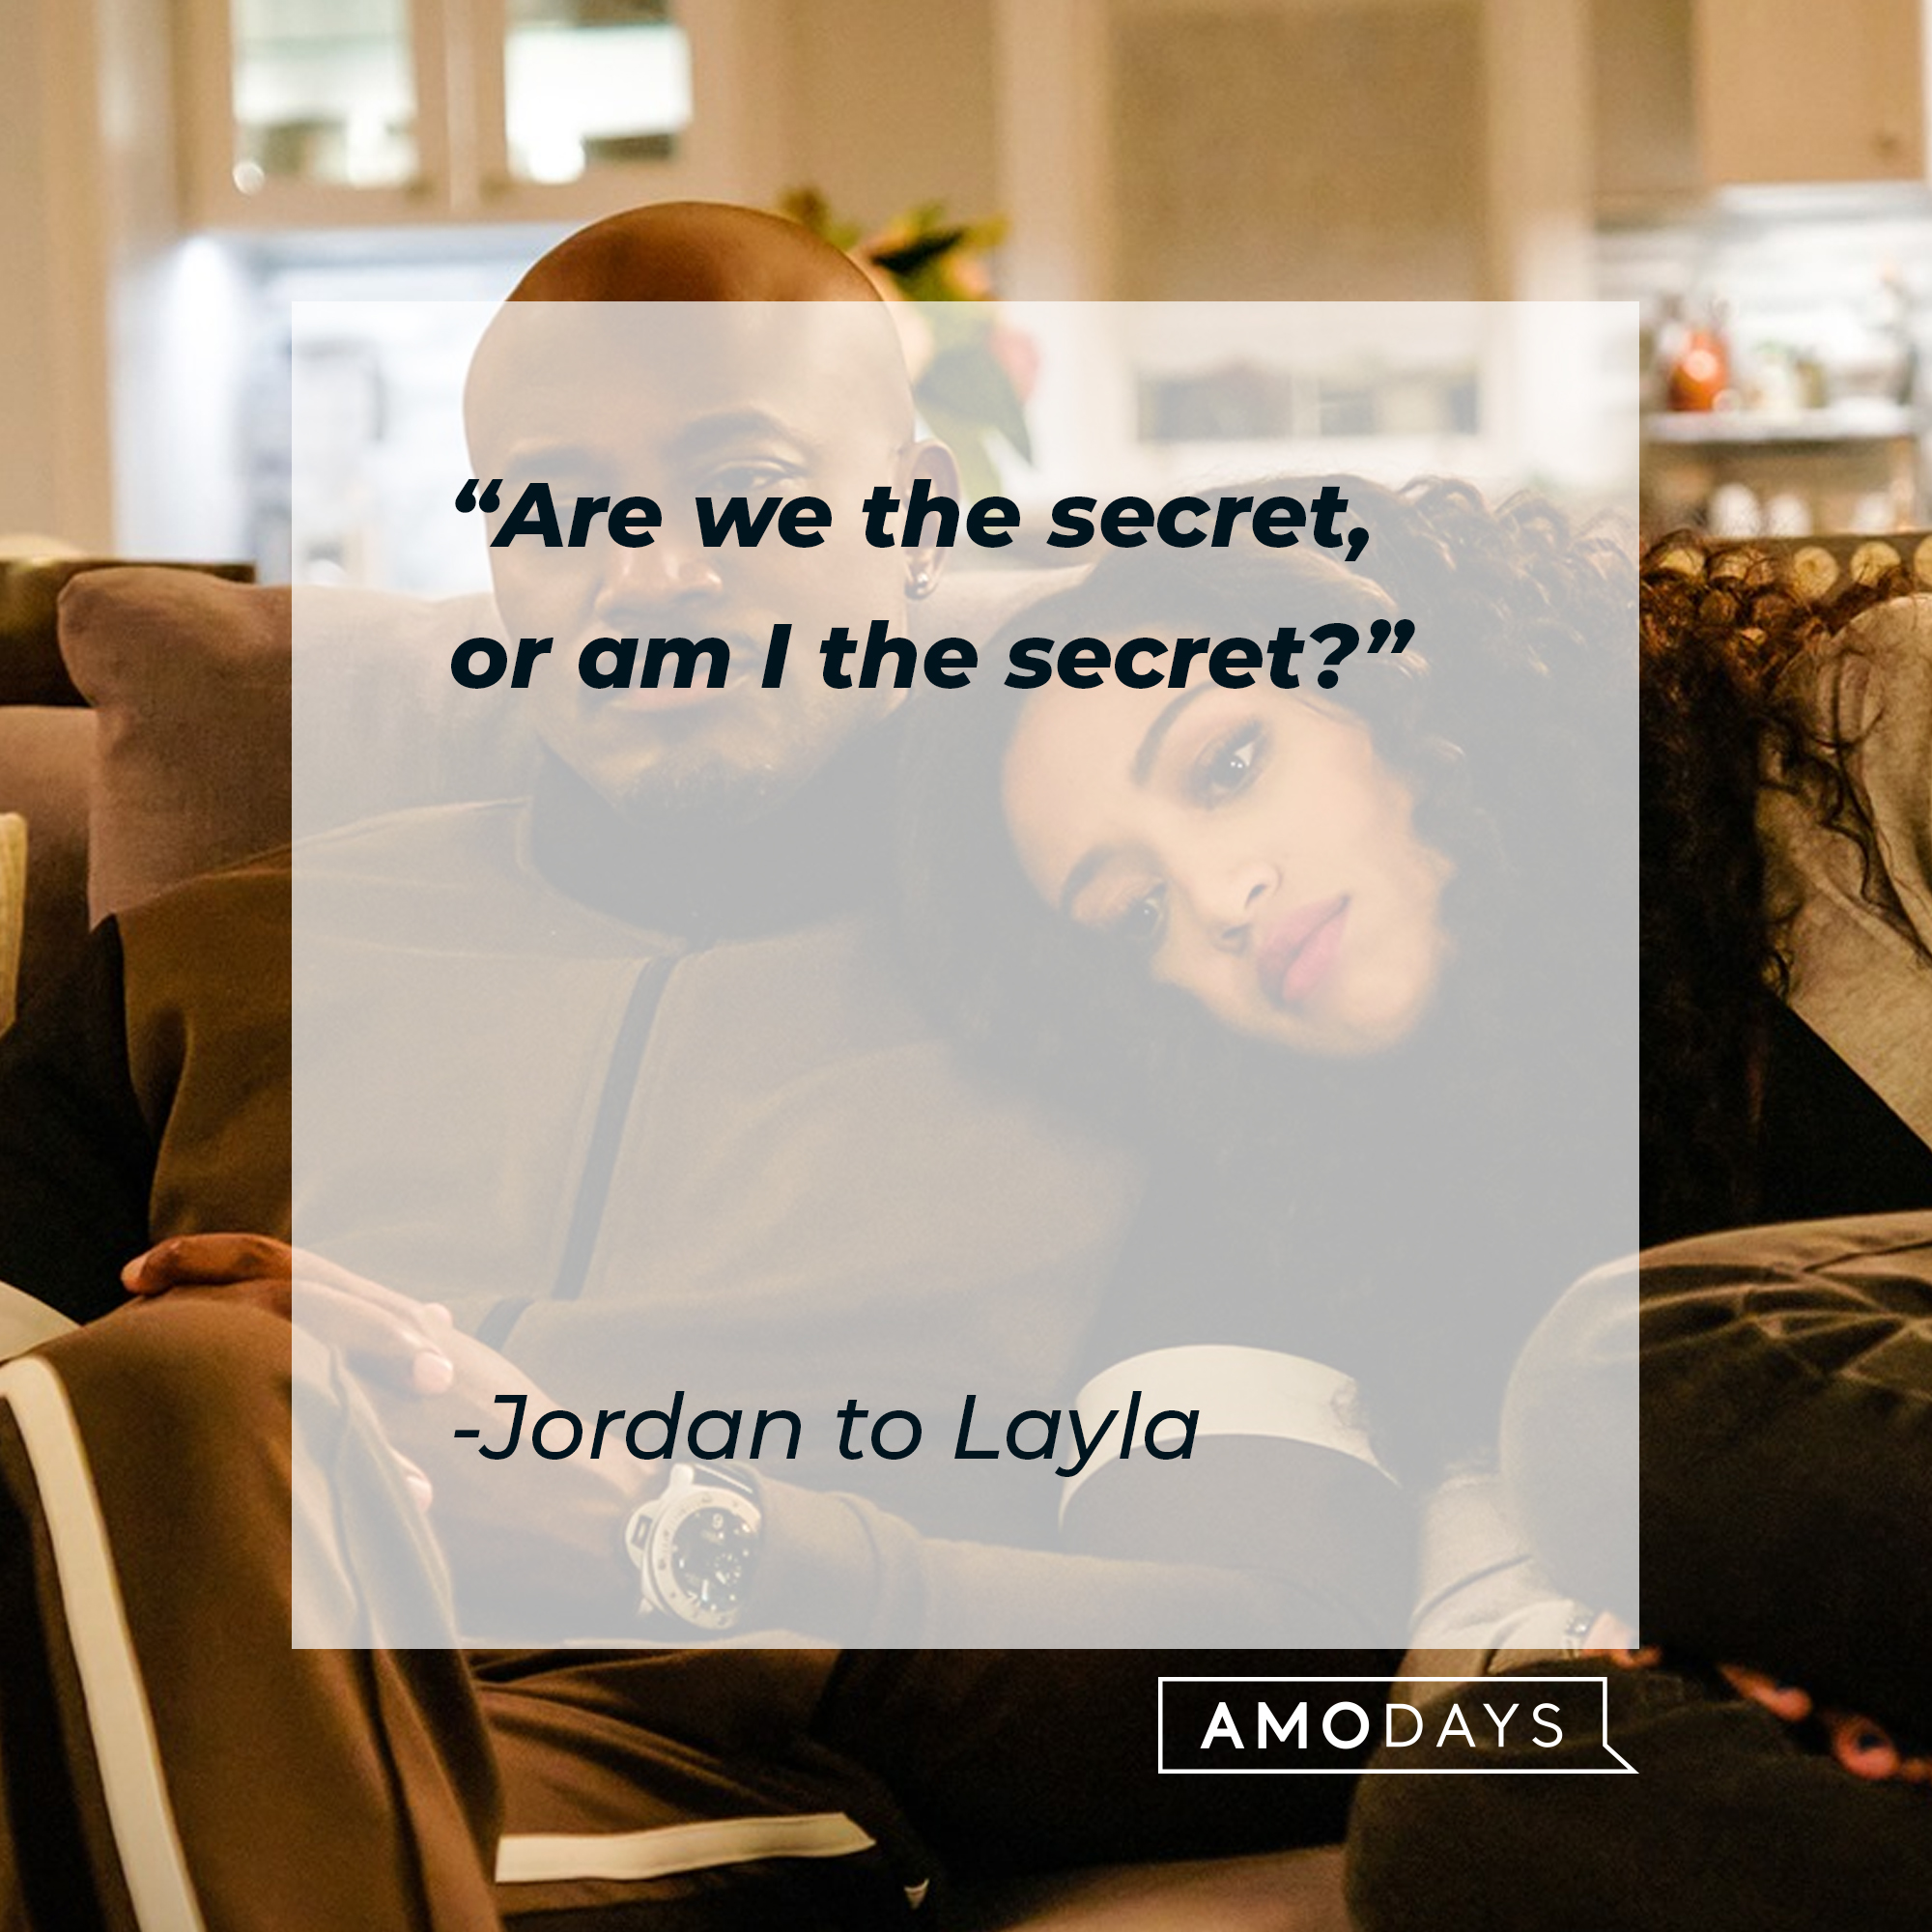 A quote from Jordan to Layla: "Are we the secret, or am I the secret?" | Source: facebook.com/CWAllAmerican